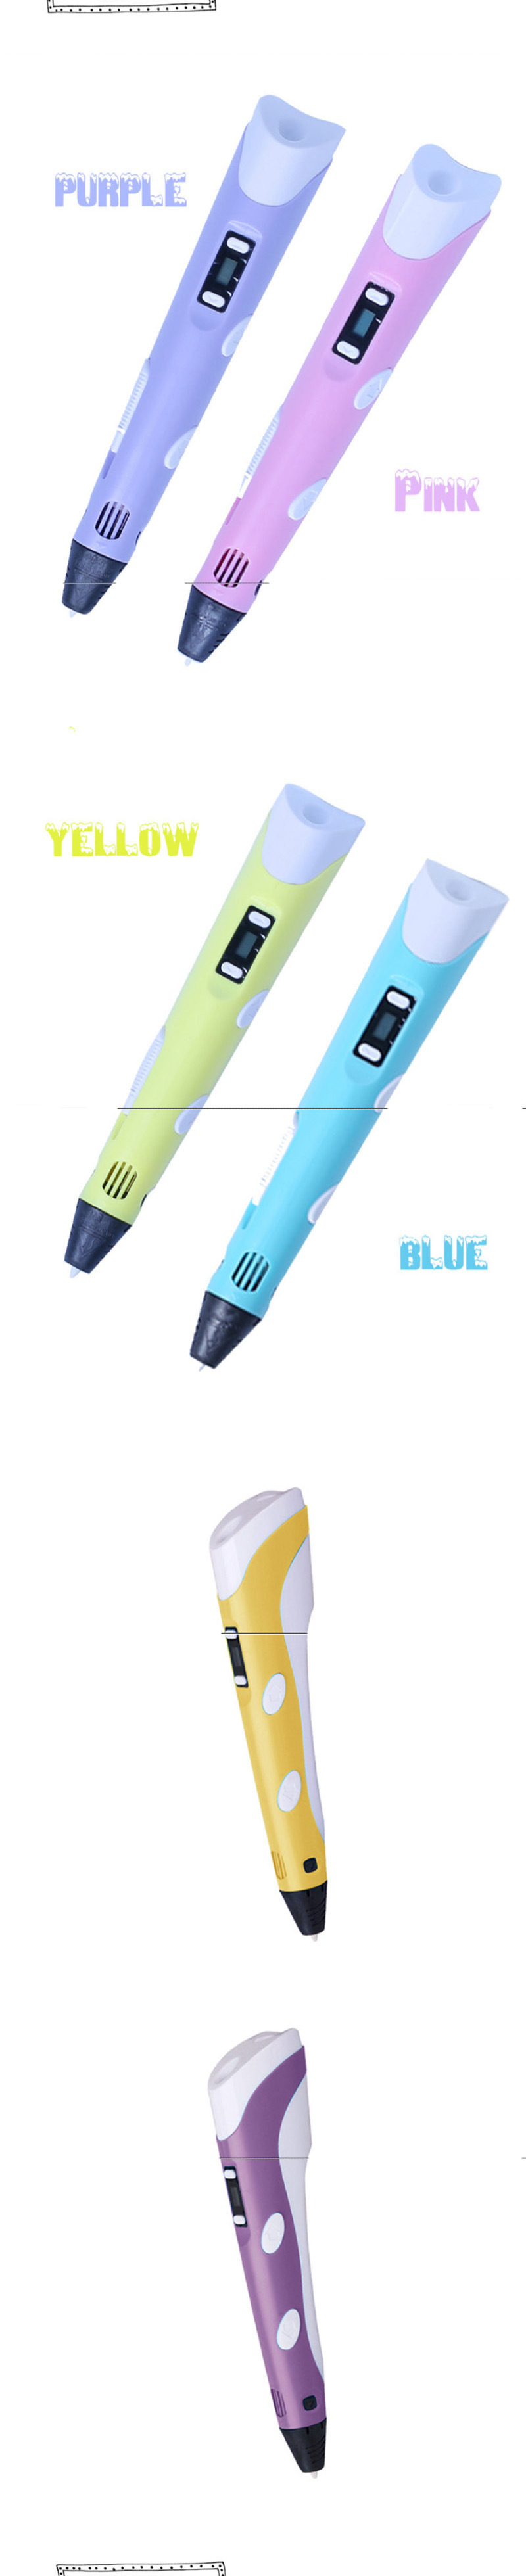 Intelligent 3D Drawingprinting Pen 3D Pencil for Kids Children for Christmas Gift